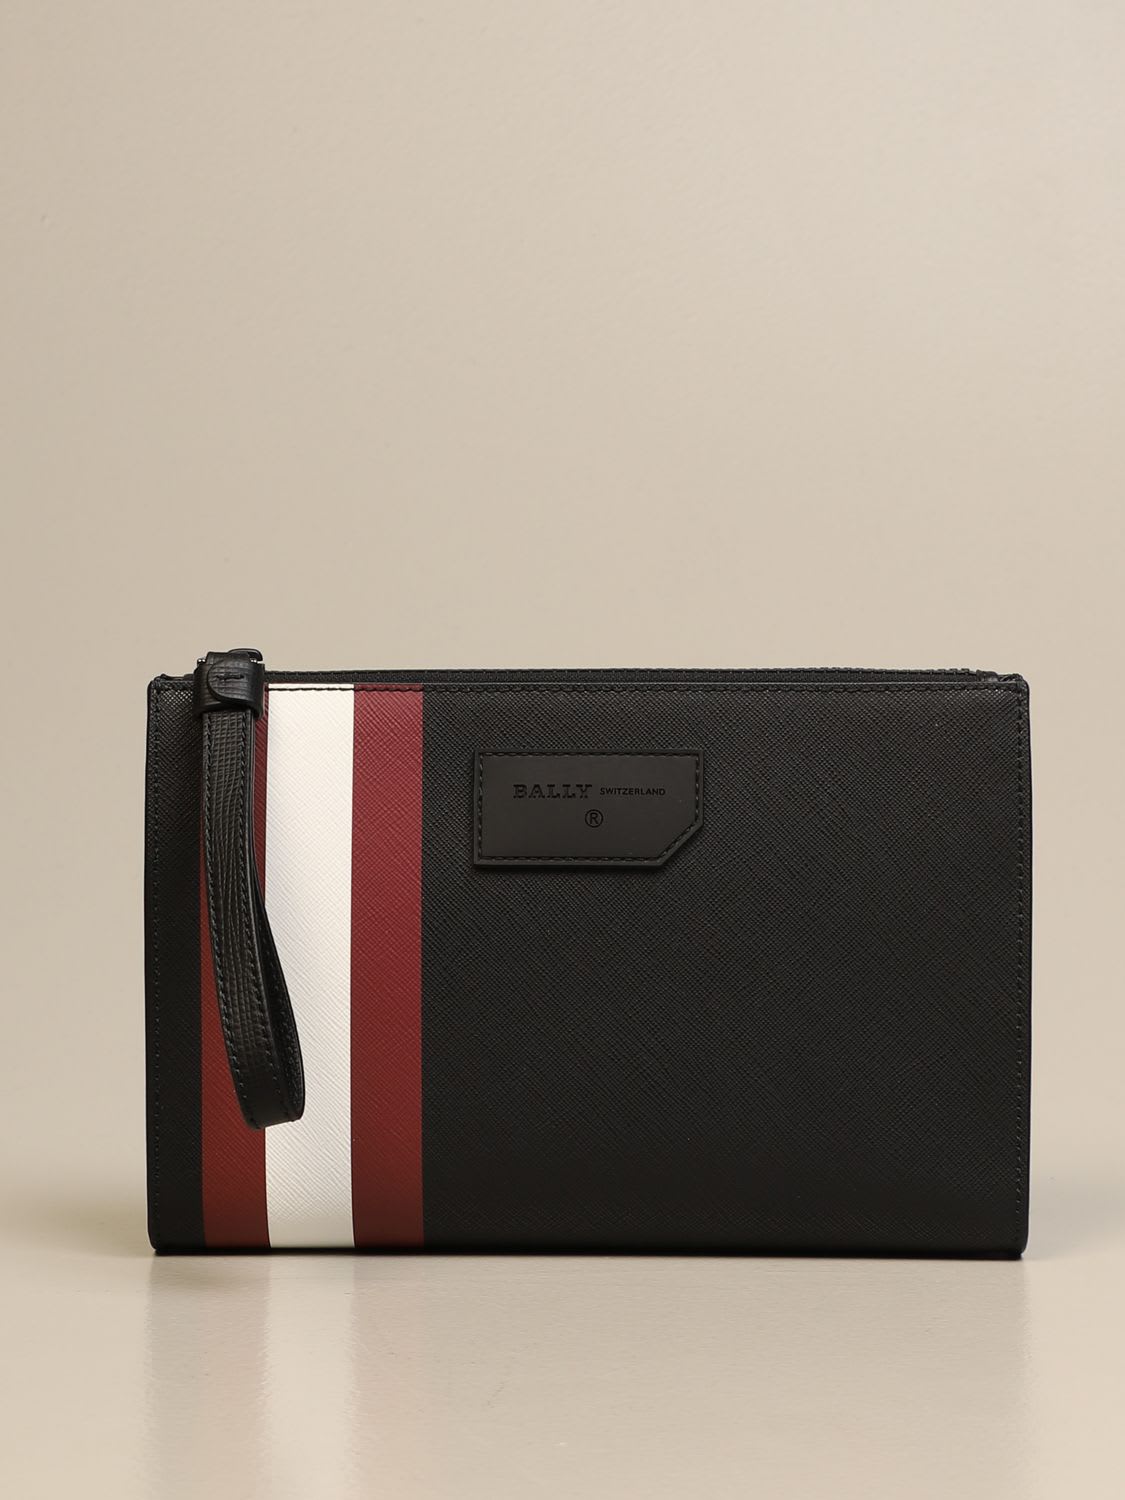 Bally Briefcase Skid Bally Clutch Bag In Coated Canvas With Trainspotting